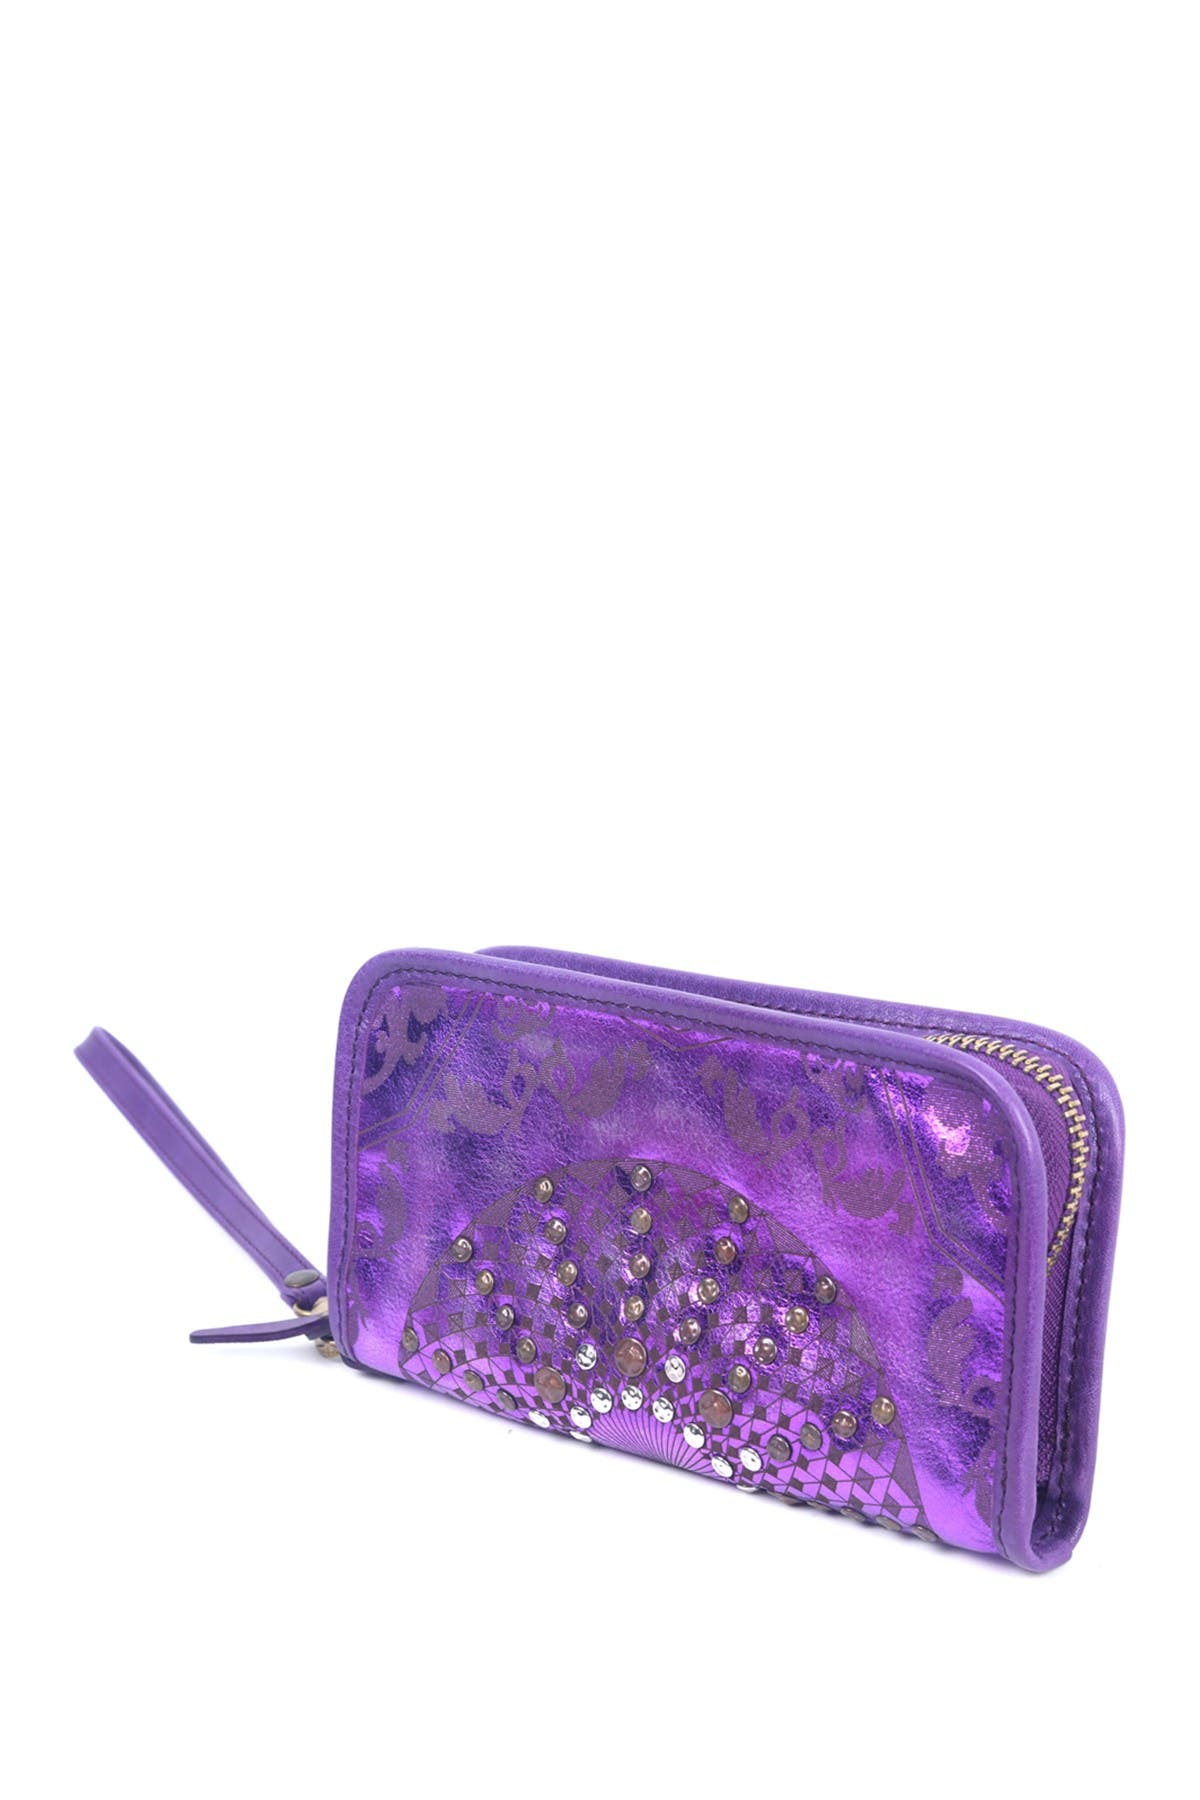 Old Trend Mola Leather Clutch In Bright Purple